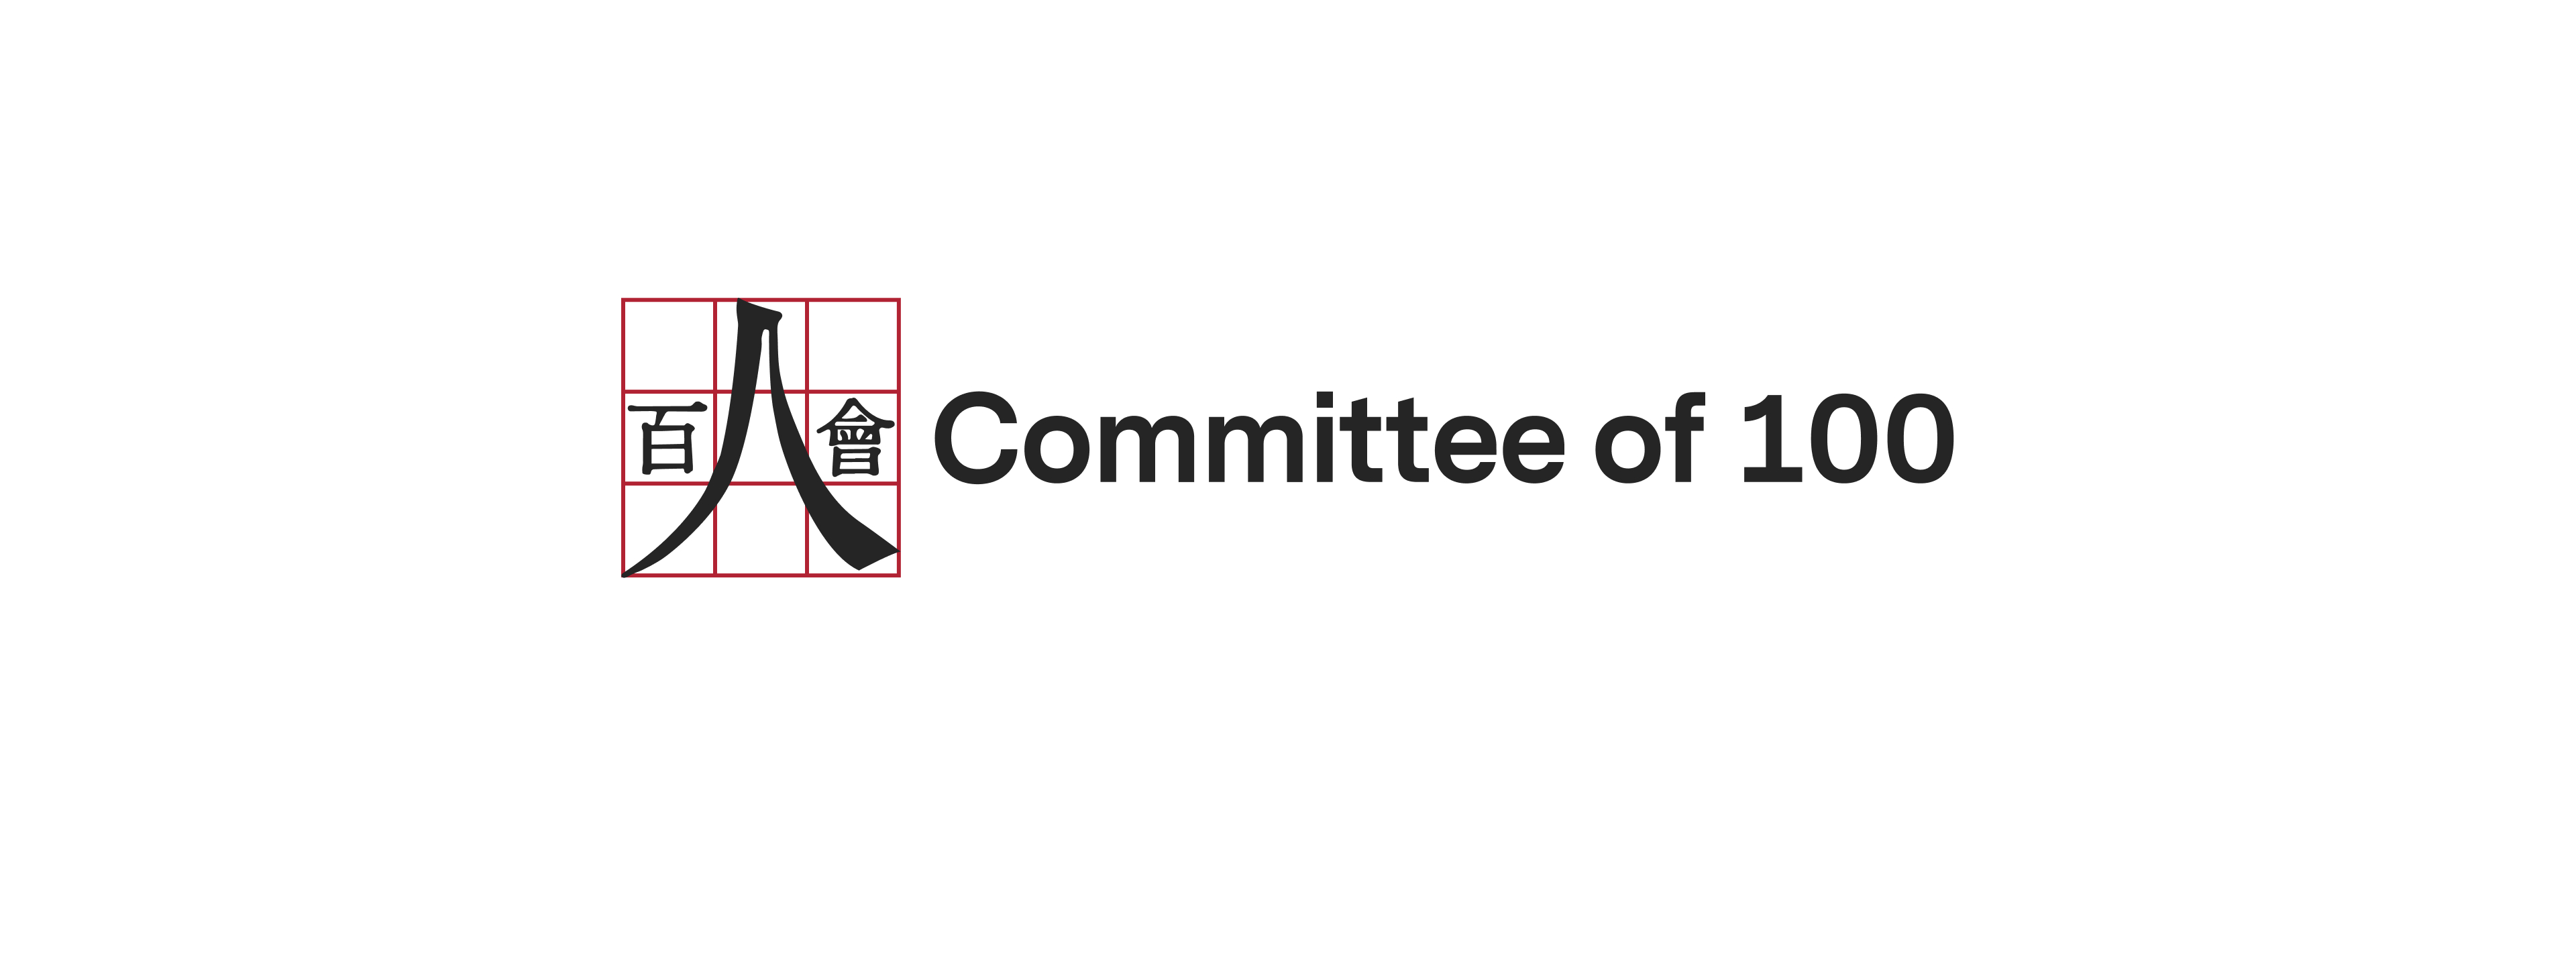 Committee of 100 Commends President-Elect Donald Trump and Congratulates Elaine Chao on Nomination as U.S. Secretary of Transportation